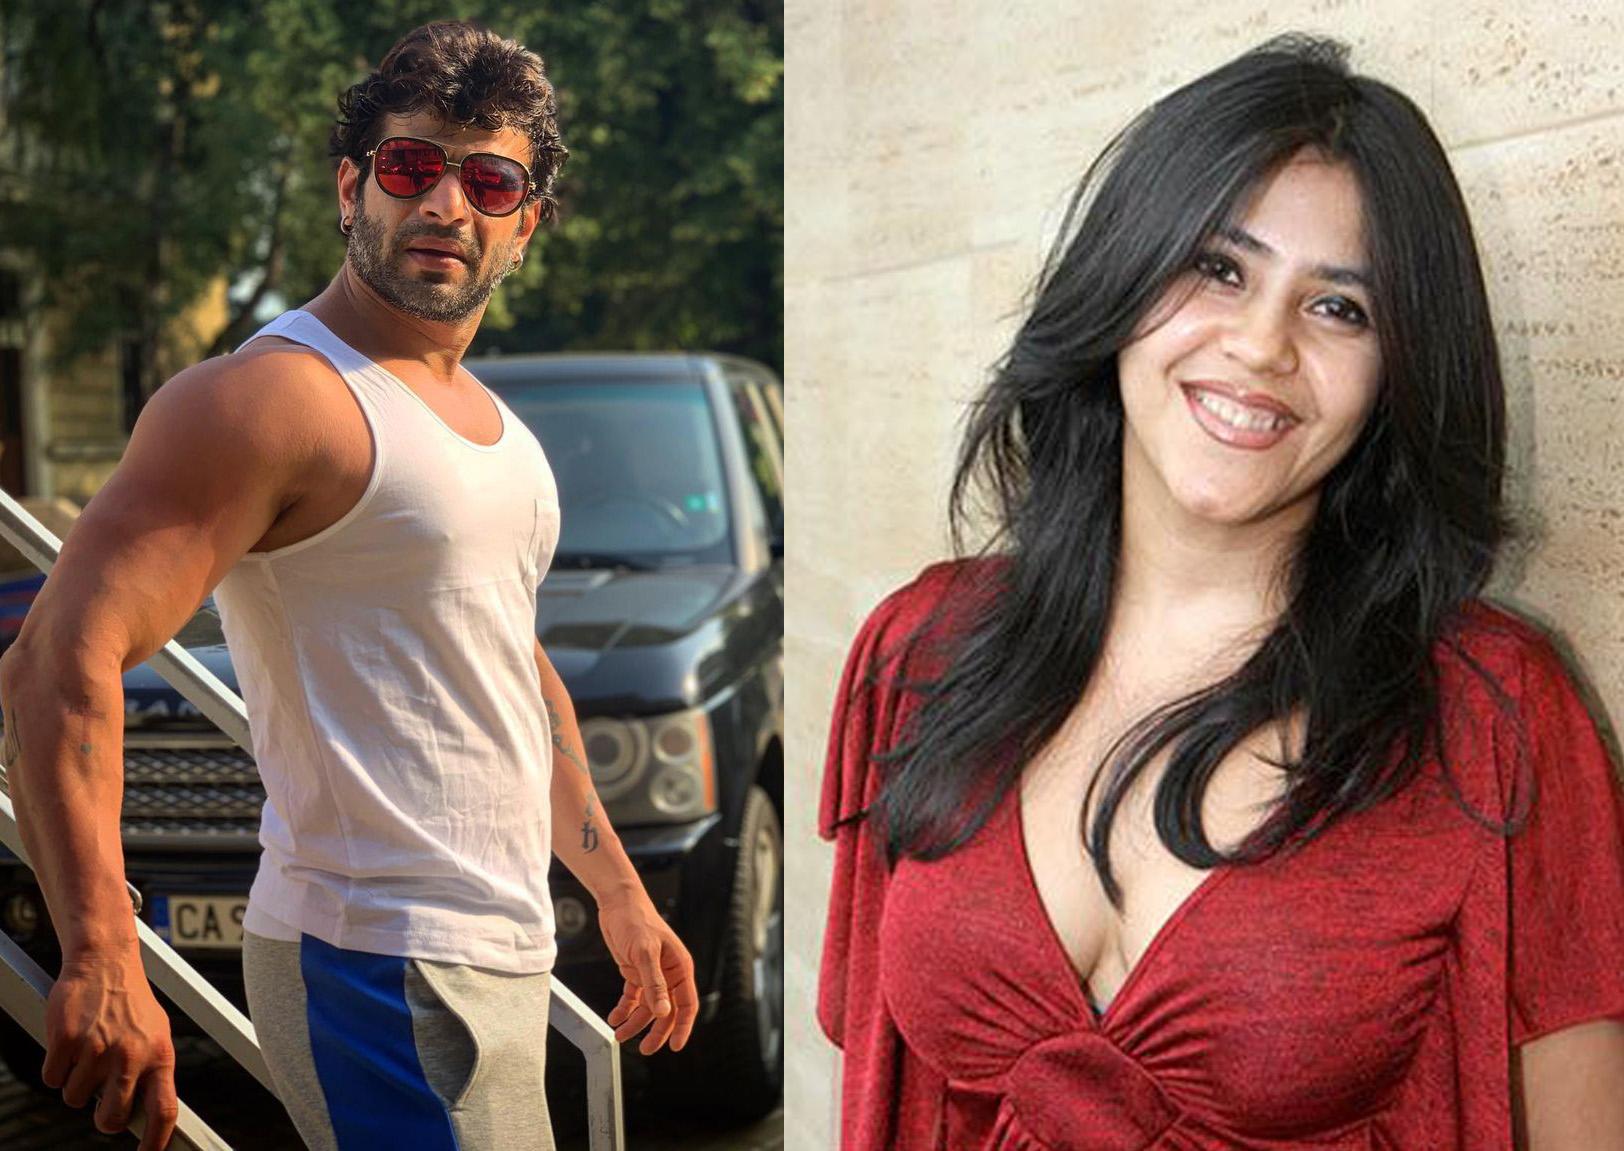 Karan Patel Thanked Ekta Kapoor For Making His Career In TV; He Says, “My Whole Career Is All Because Of The Women”!